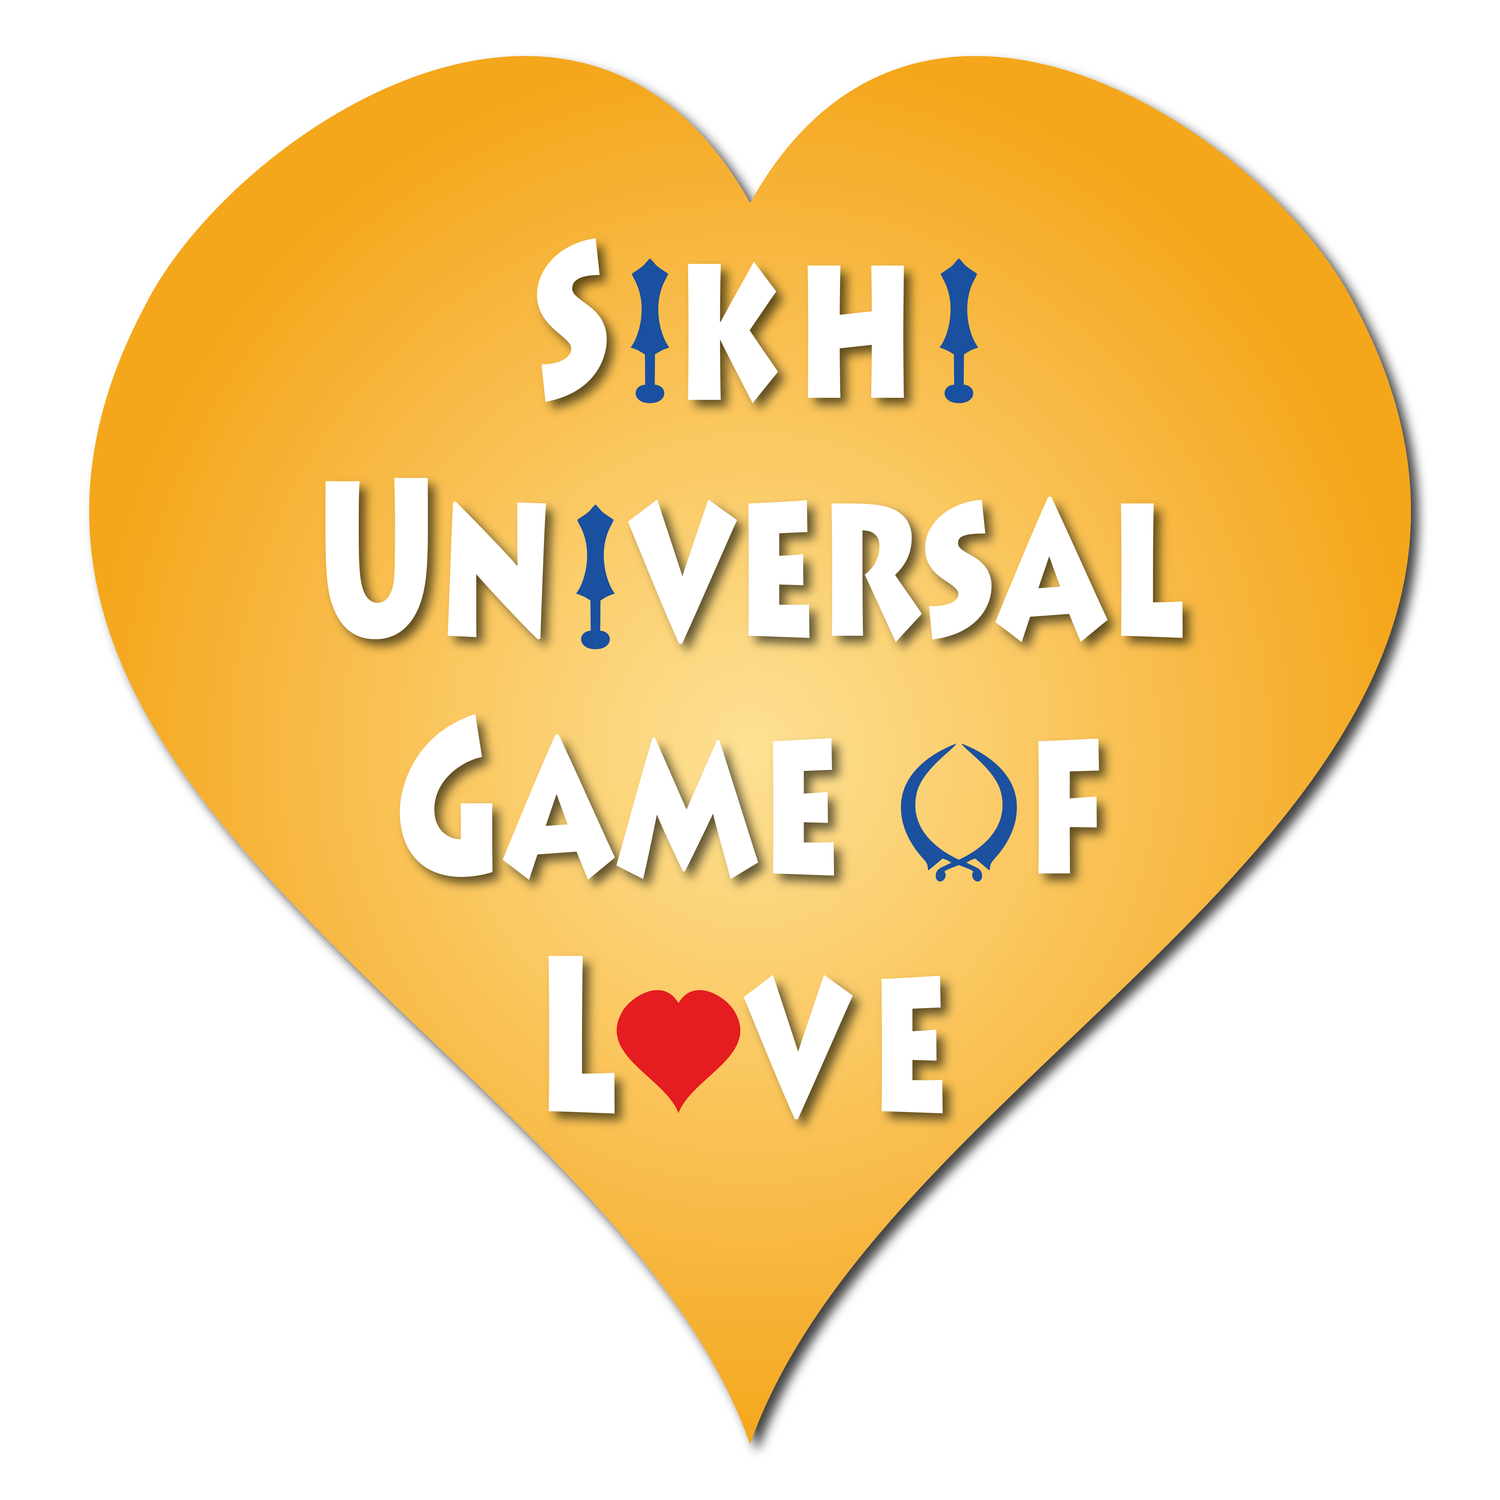 game-of-love-241-how-much-are-we-worth-sikhi-universal-game-of-love